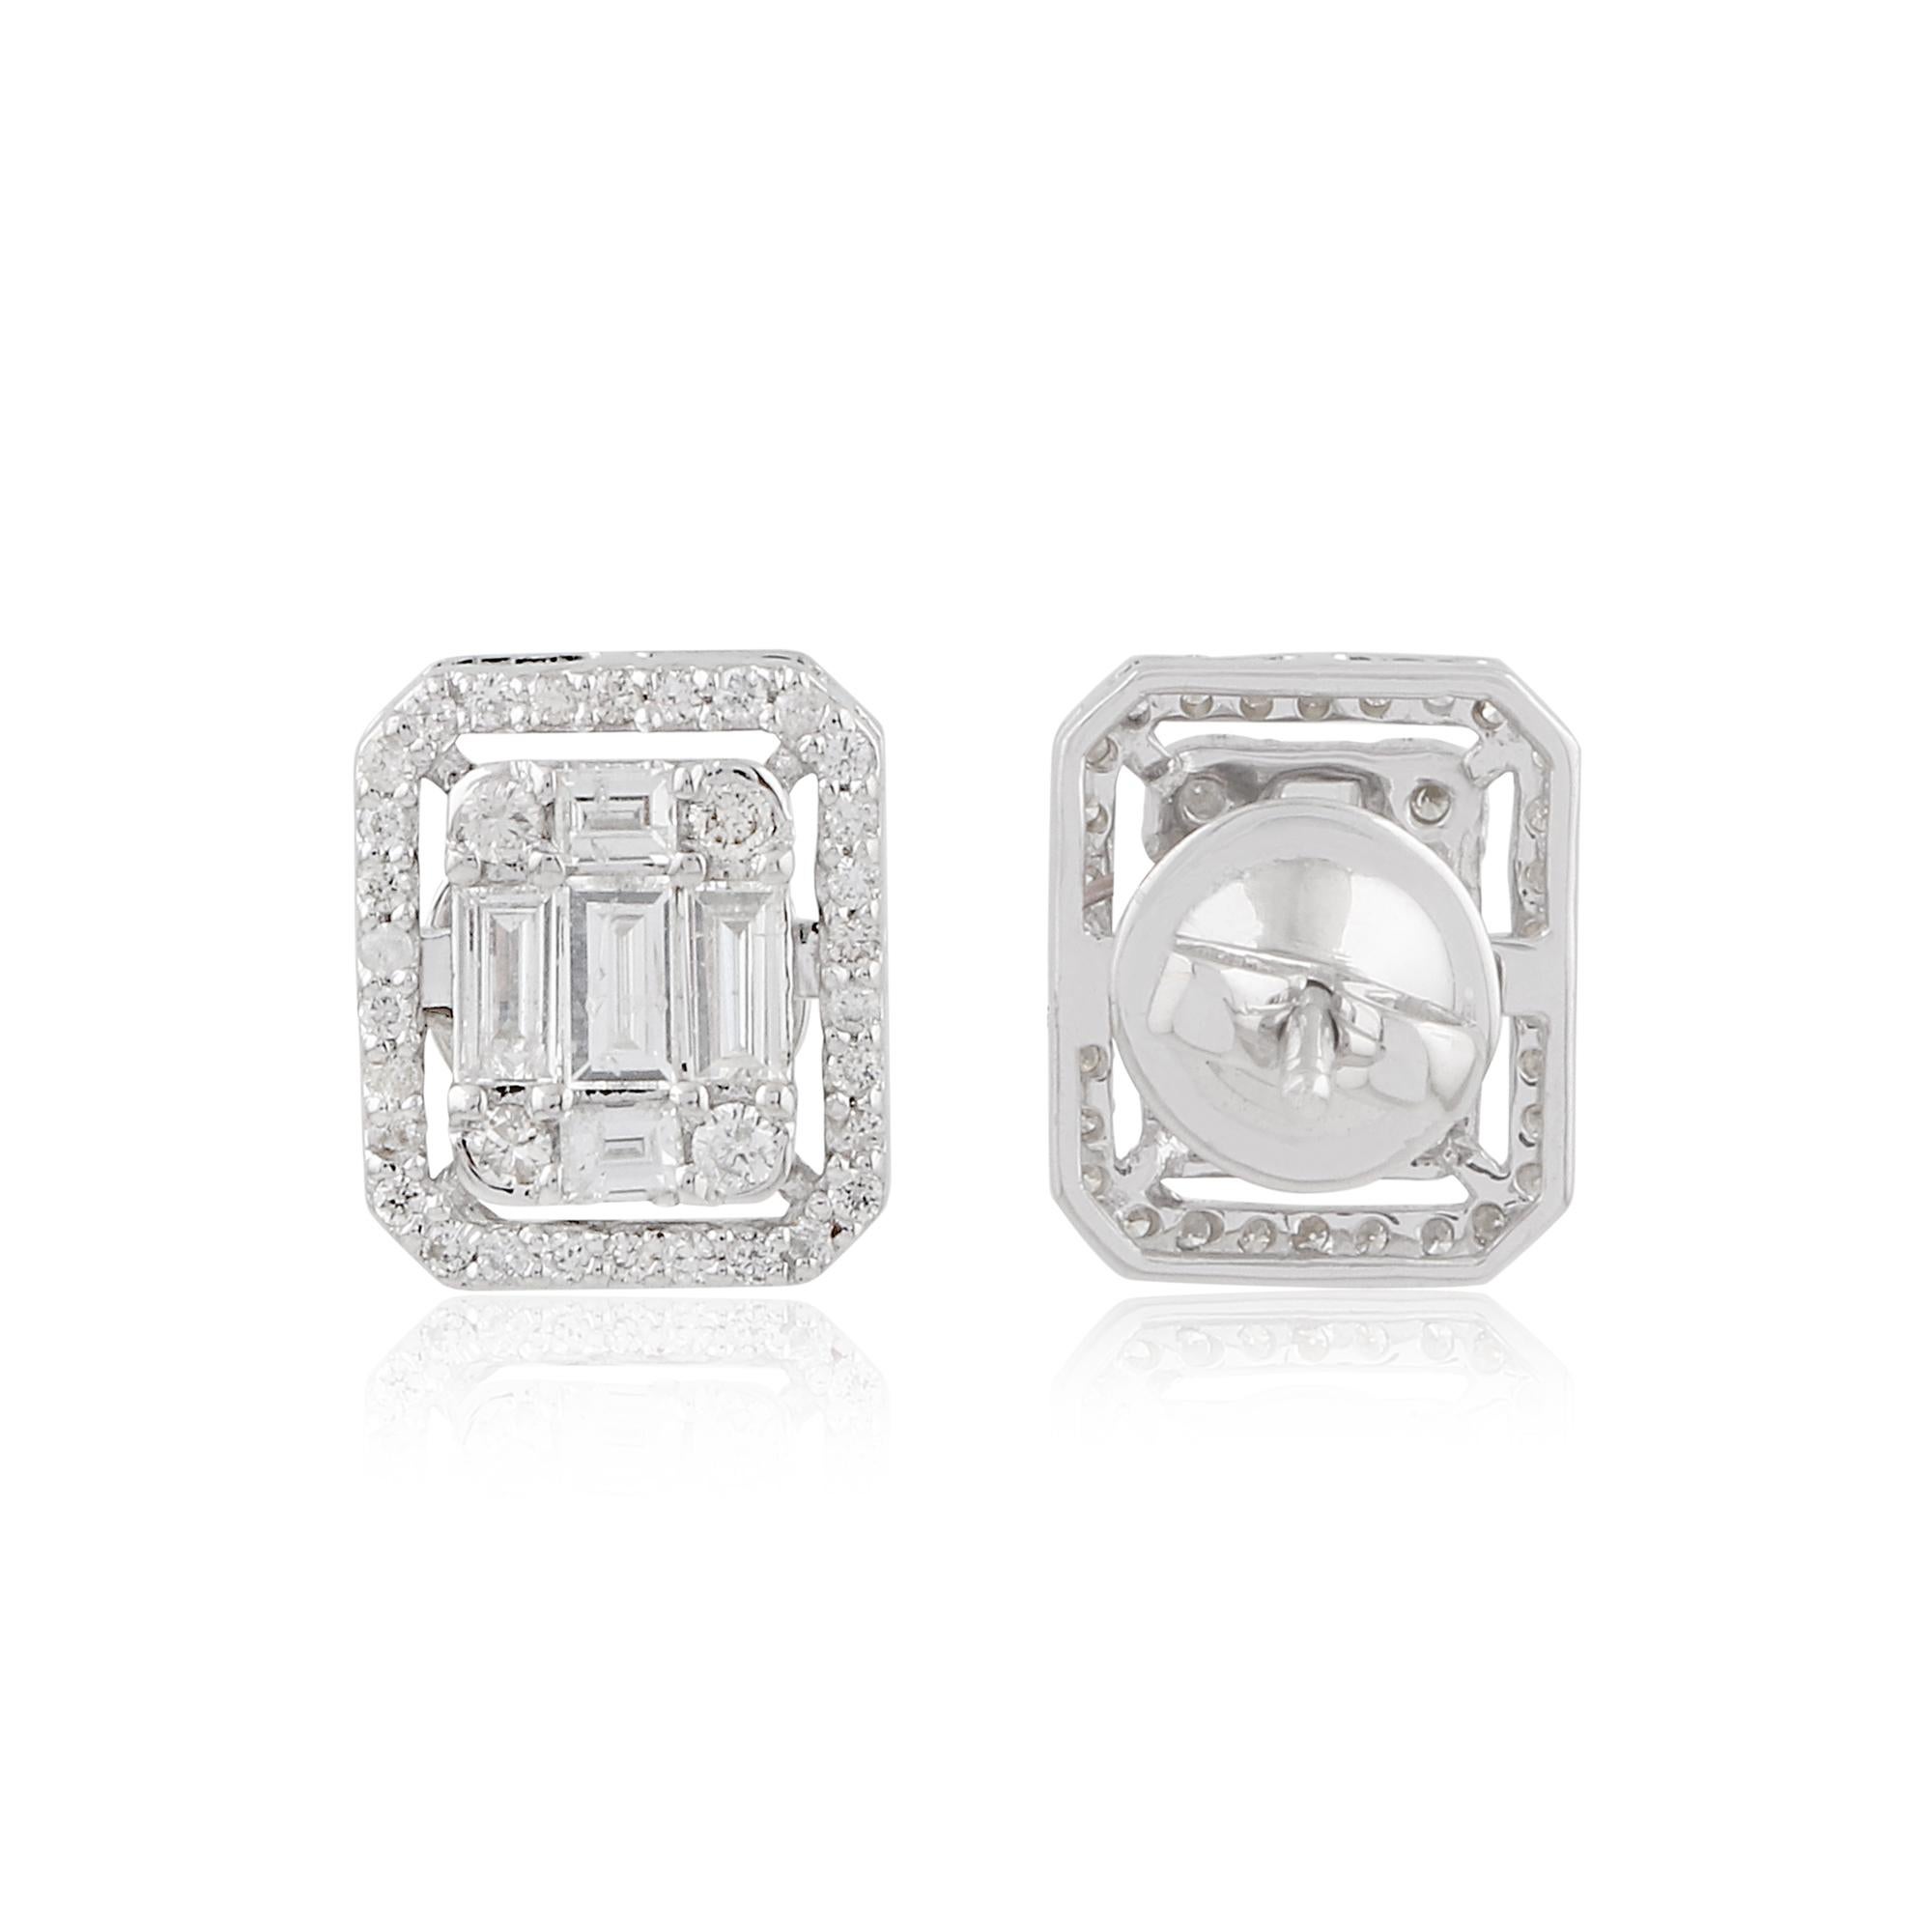 Elevate your style with these exquisite 1 Carat SI Clarity HI Color Baguette Diamond Fine Stud Earrings, meticulously crafted in lustrous 14 Karat White Gold. These stunning earrings are a celebration of sophistication and elegance, destined to